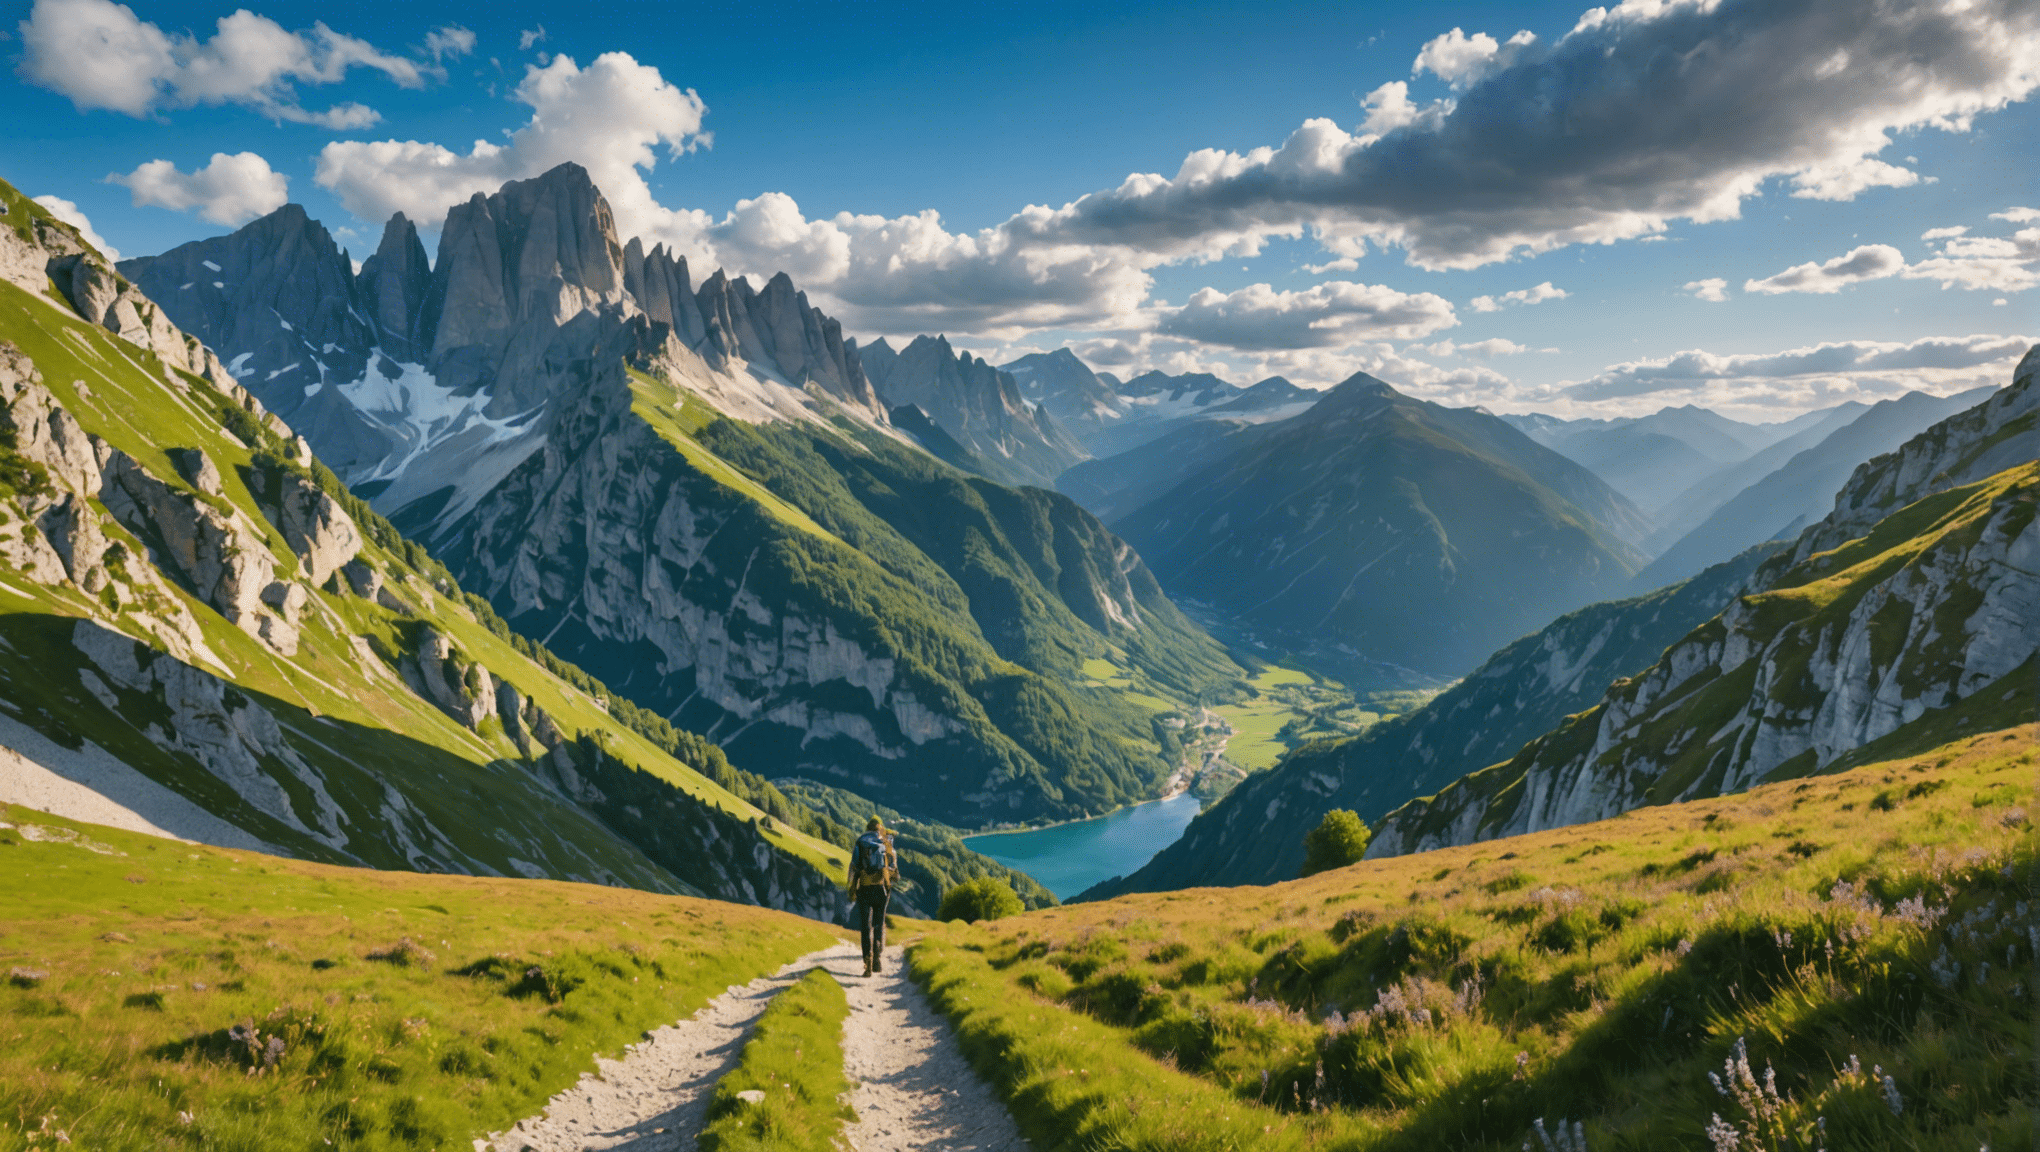 discover the most beautiful hiking trails in France and plan your next adventure by exploring this year's must-see destinations.